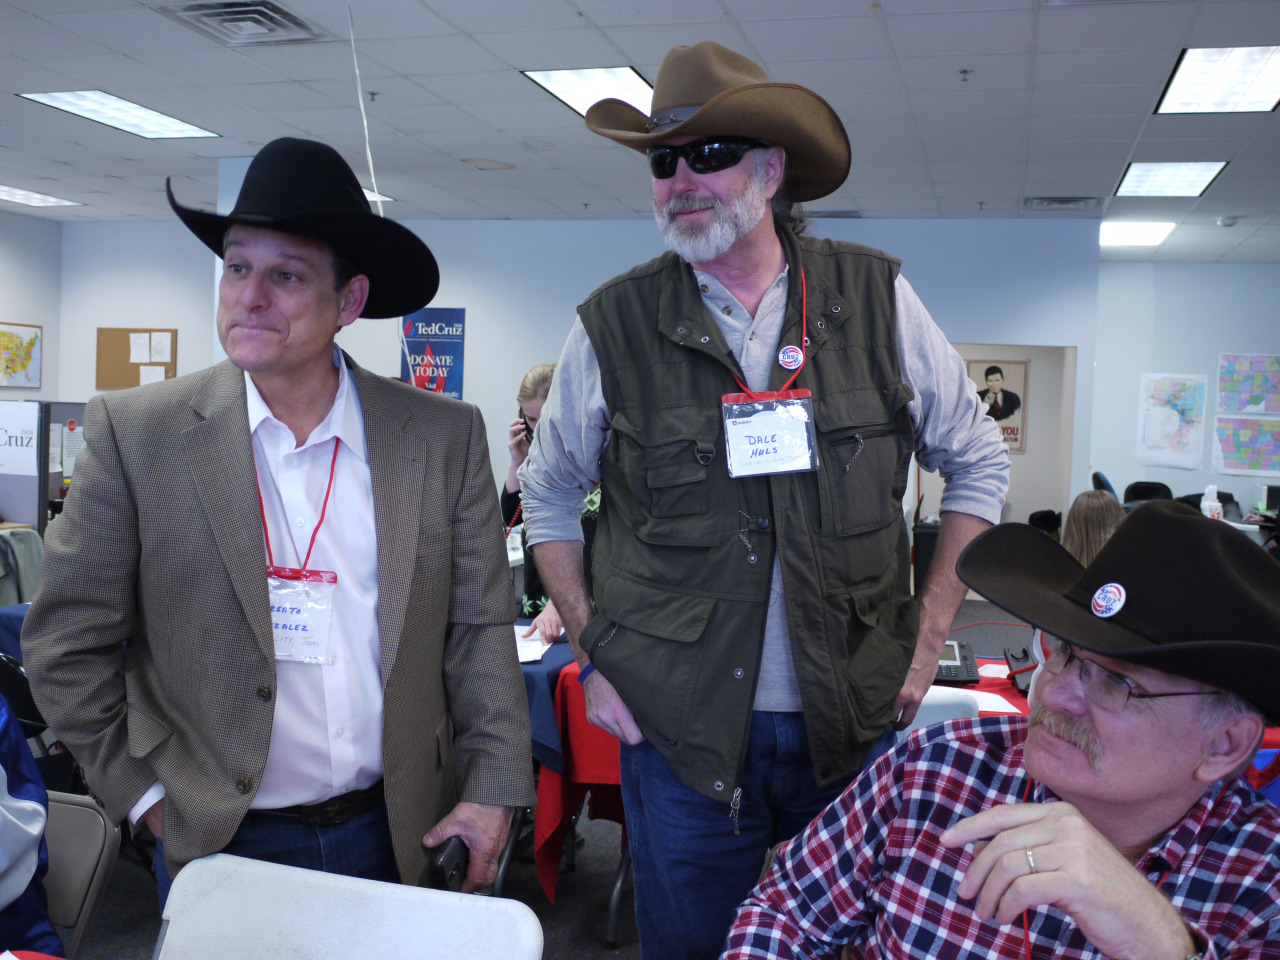 These ranchers drove 1,000 miles from Houston to volunteer for Ted Cruz. They were making phone calls from the Cruz campaign office in Urbandale, Iowa. (Alex Ashlock/Here &amp; Now)